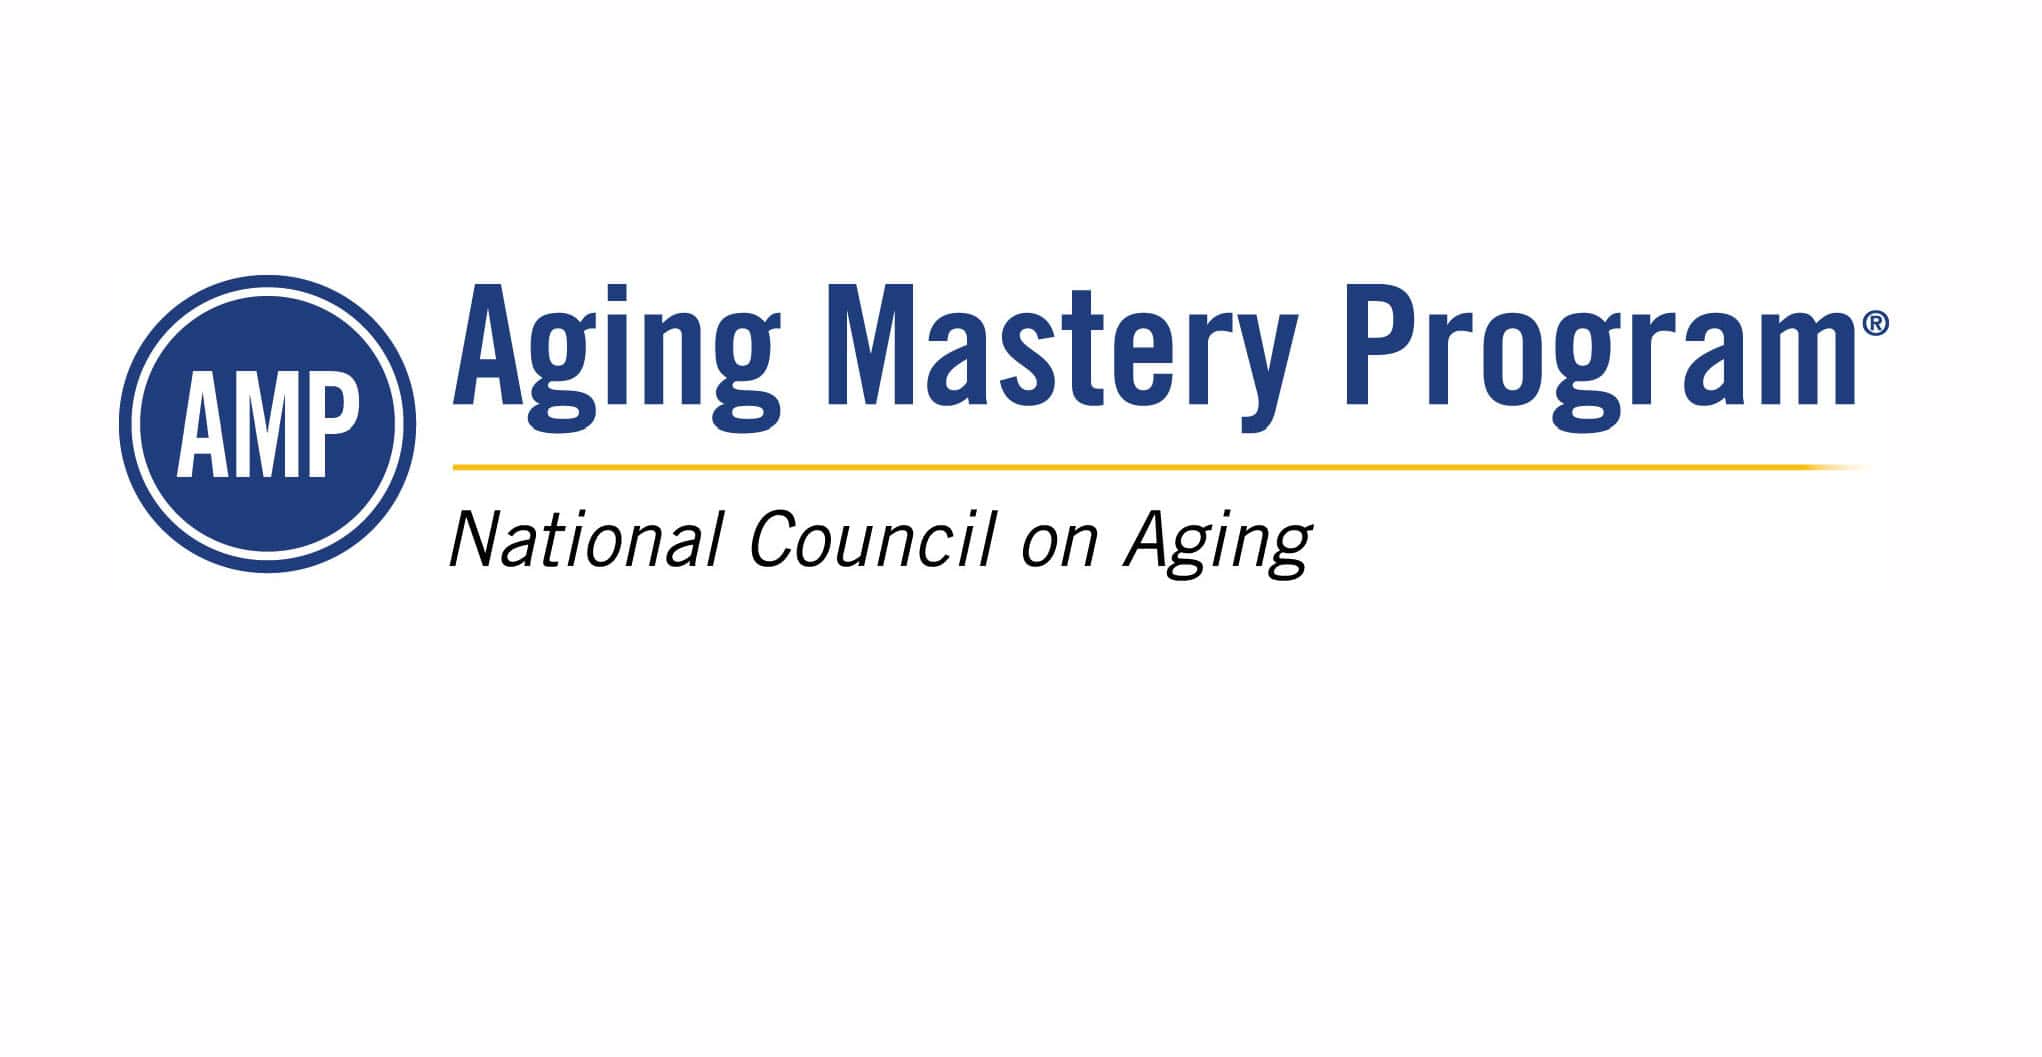 Area Agency on Aging Readies Aging Mastery Program in the New Year | Moody on the Market